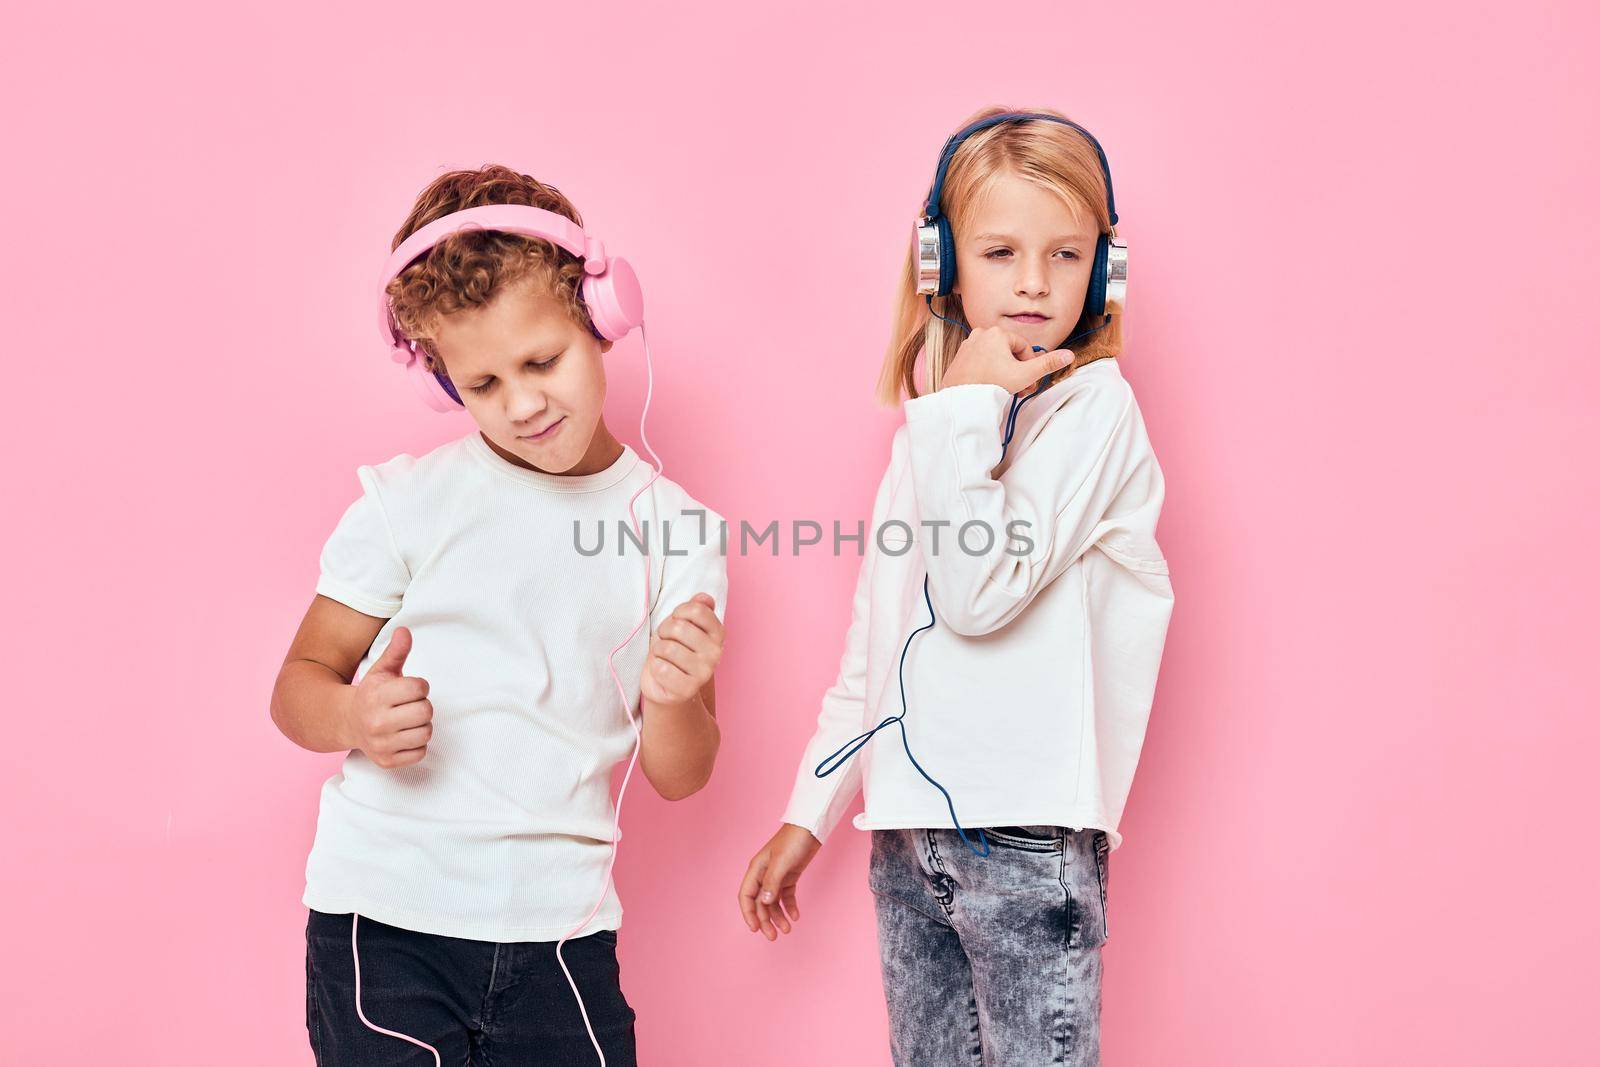 Active young people together fun posing isolated background. High quality photo